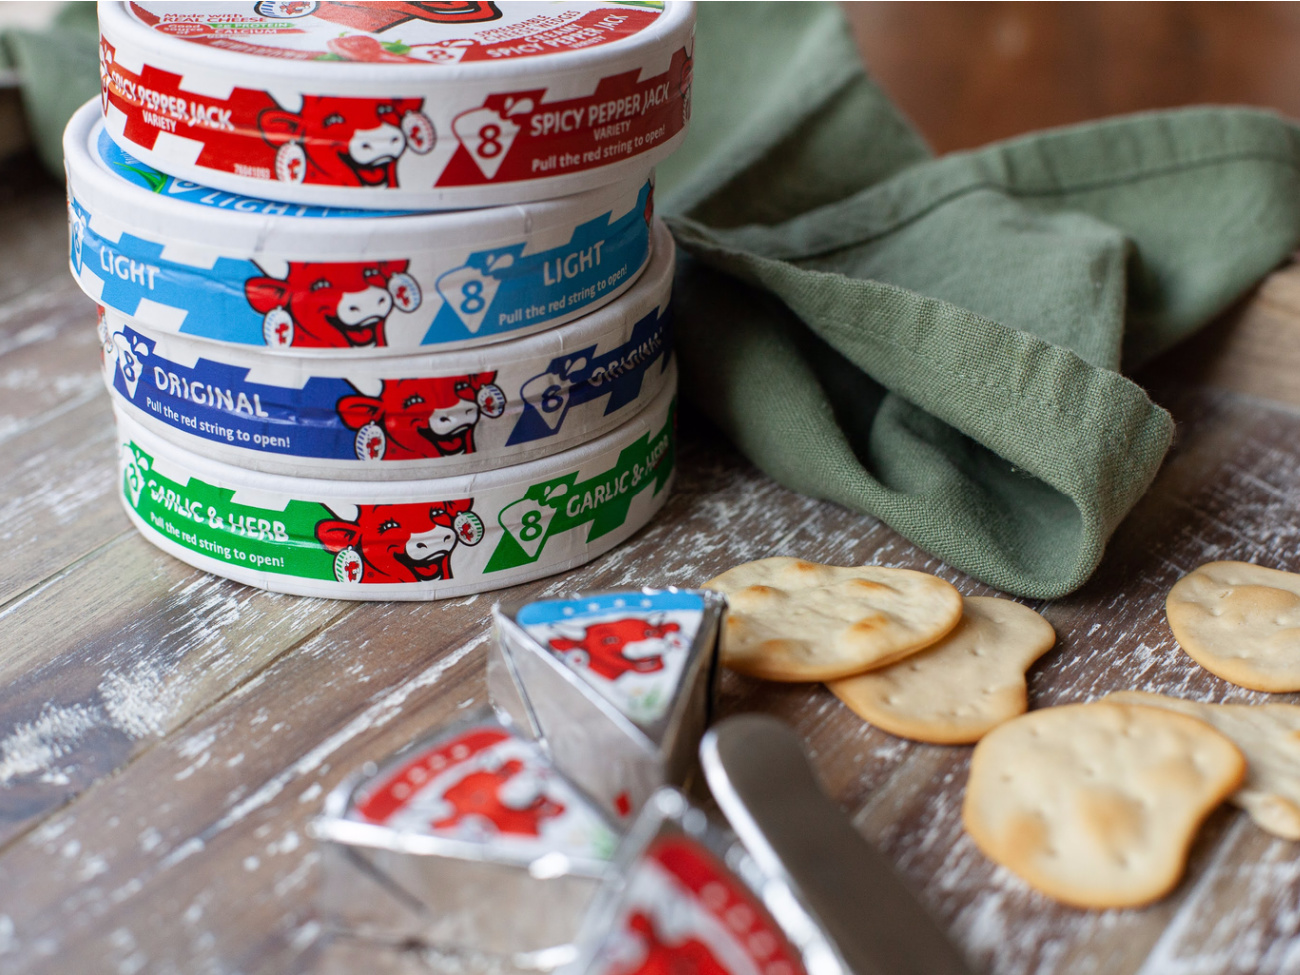 The Laughing Cow Spreadable Cheese Wedges Are BOGO At Publix – Pay Just $2.10 Per Pack